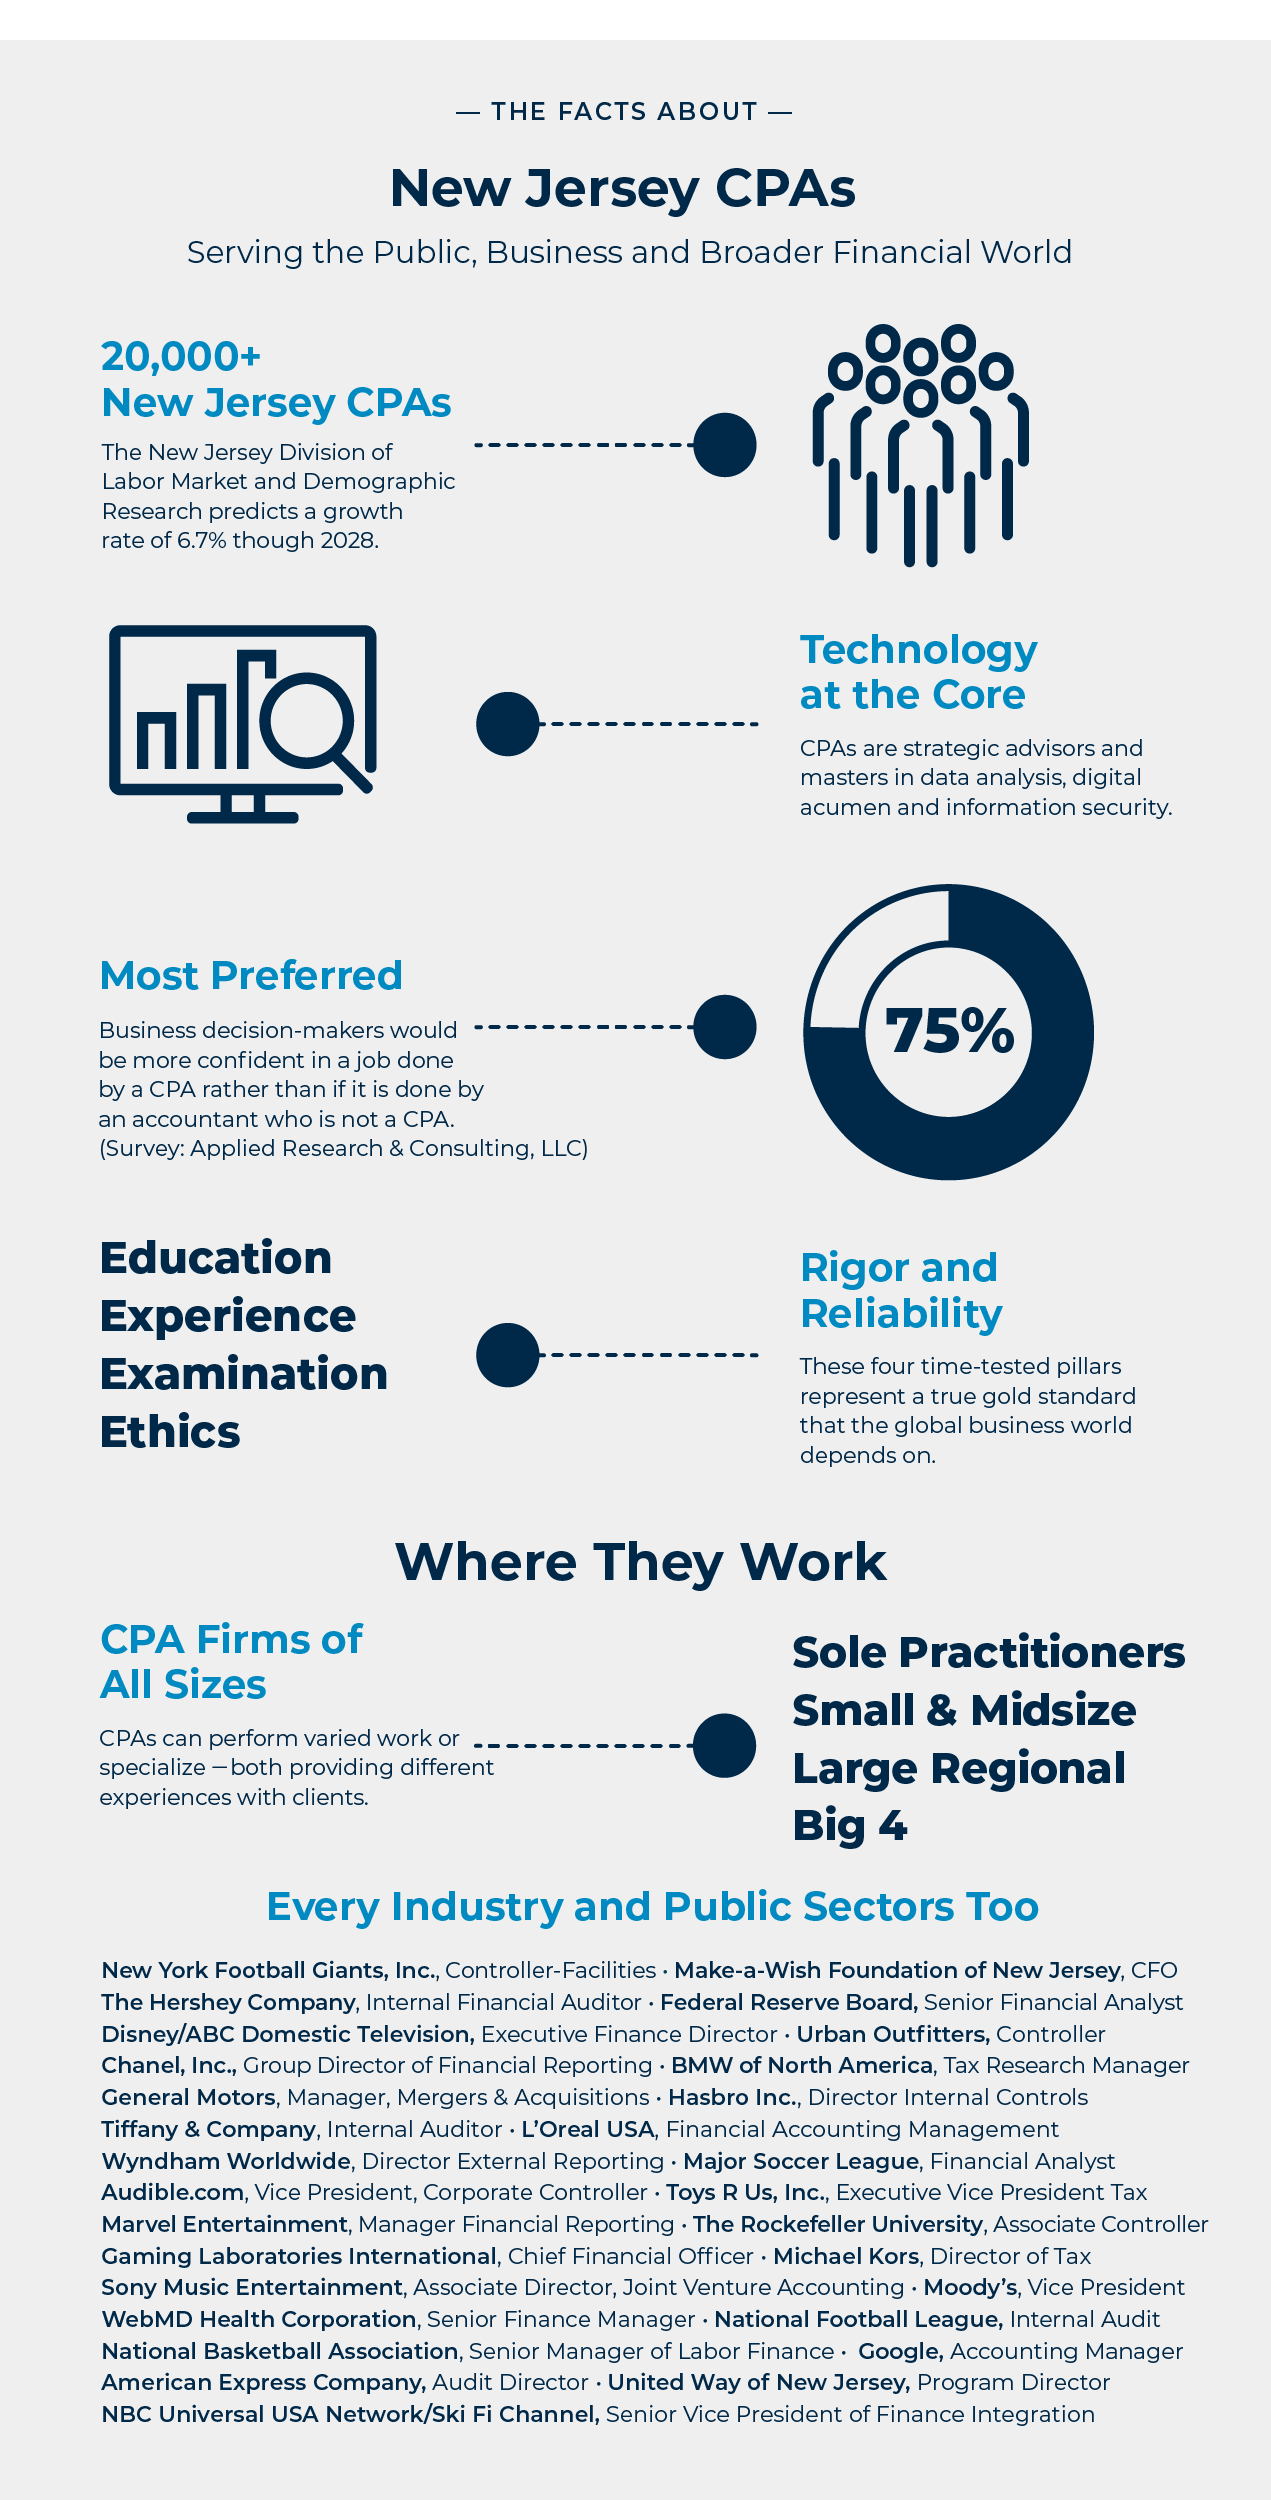 The Facts About New Jersey CPAs